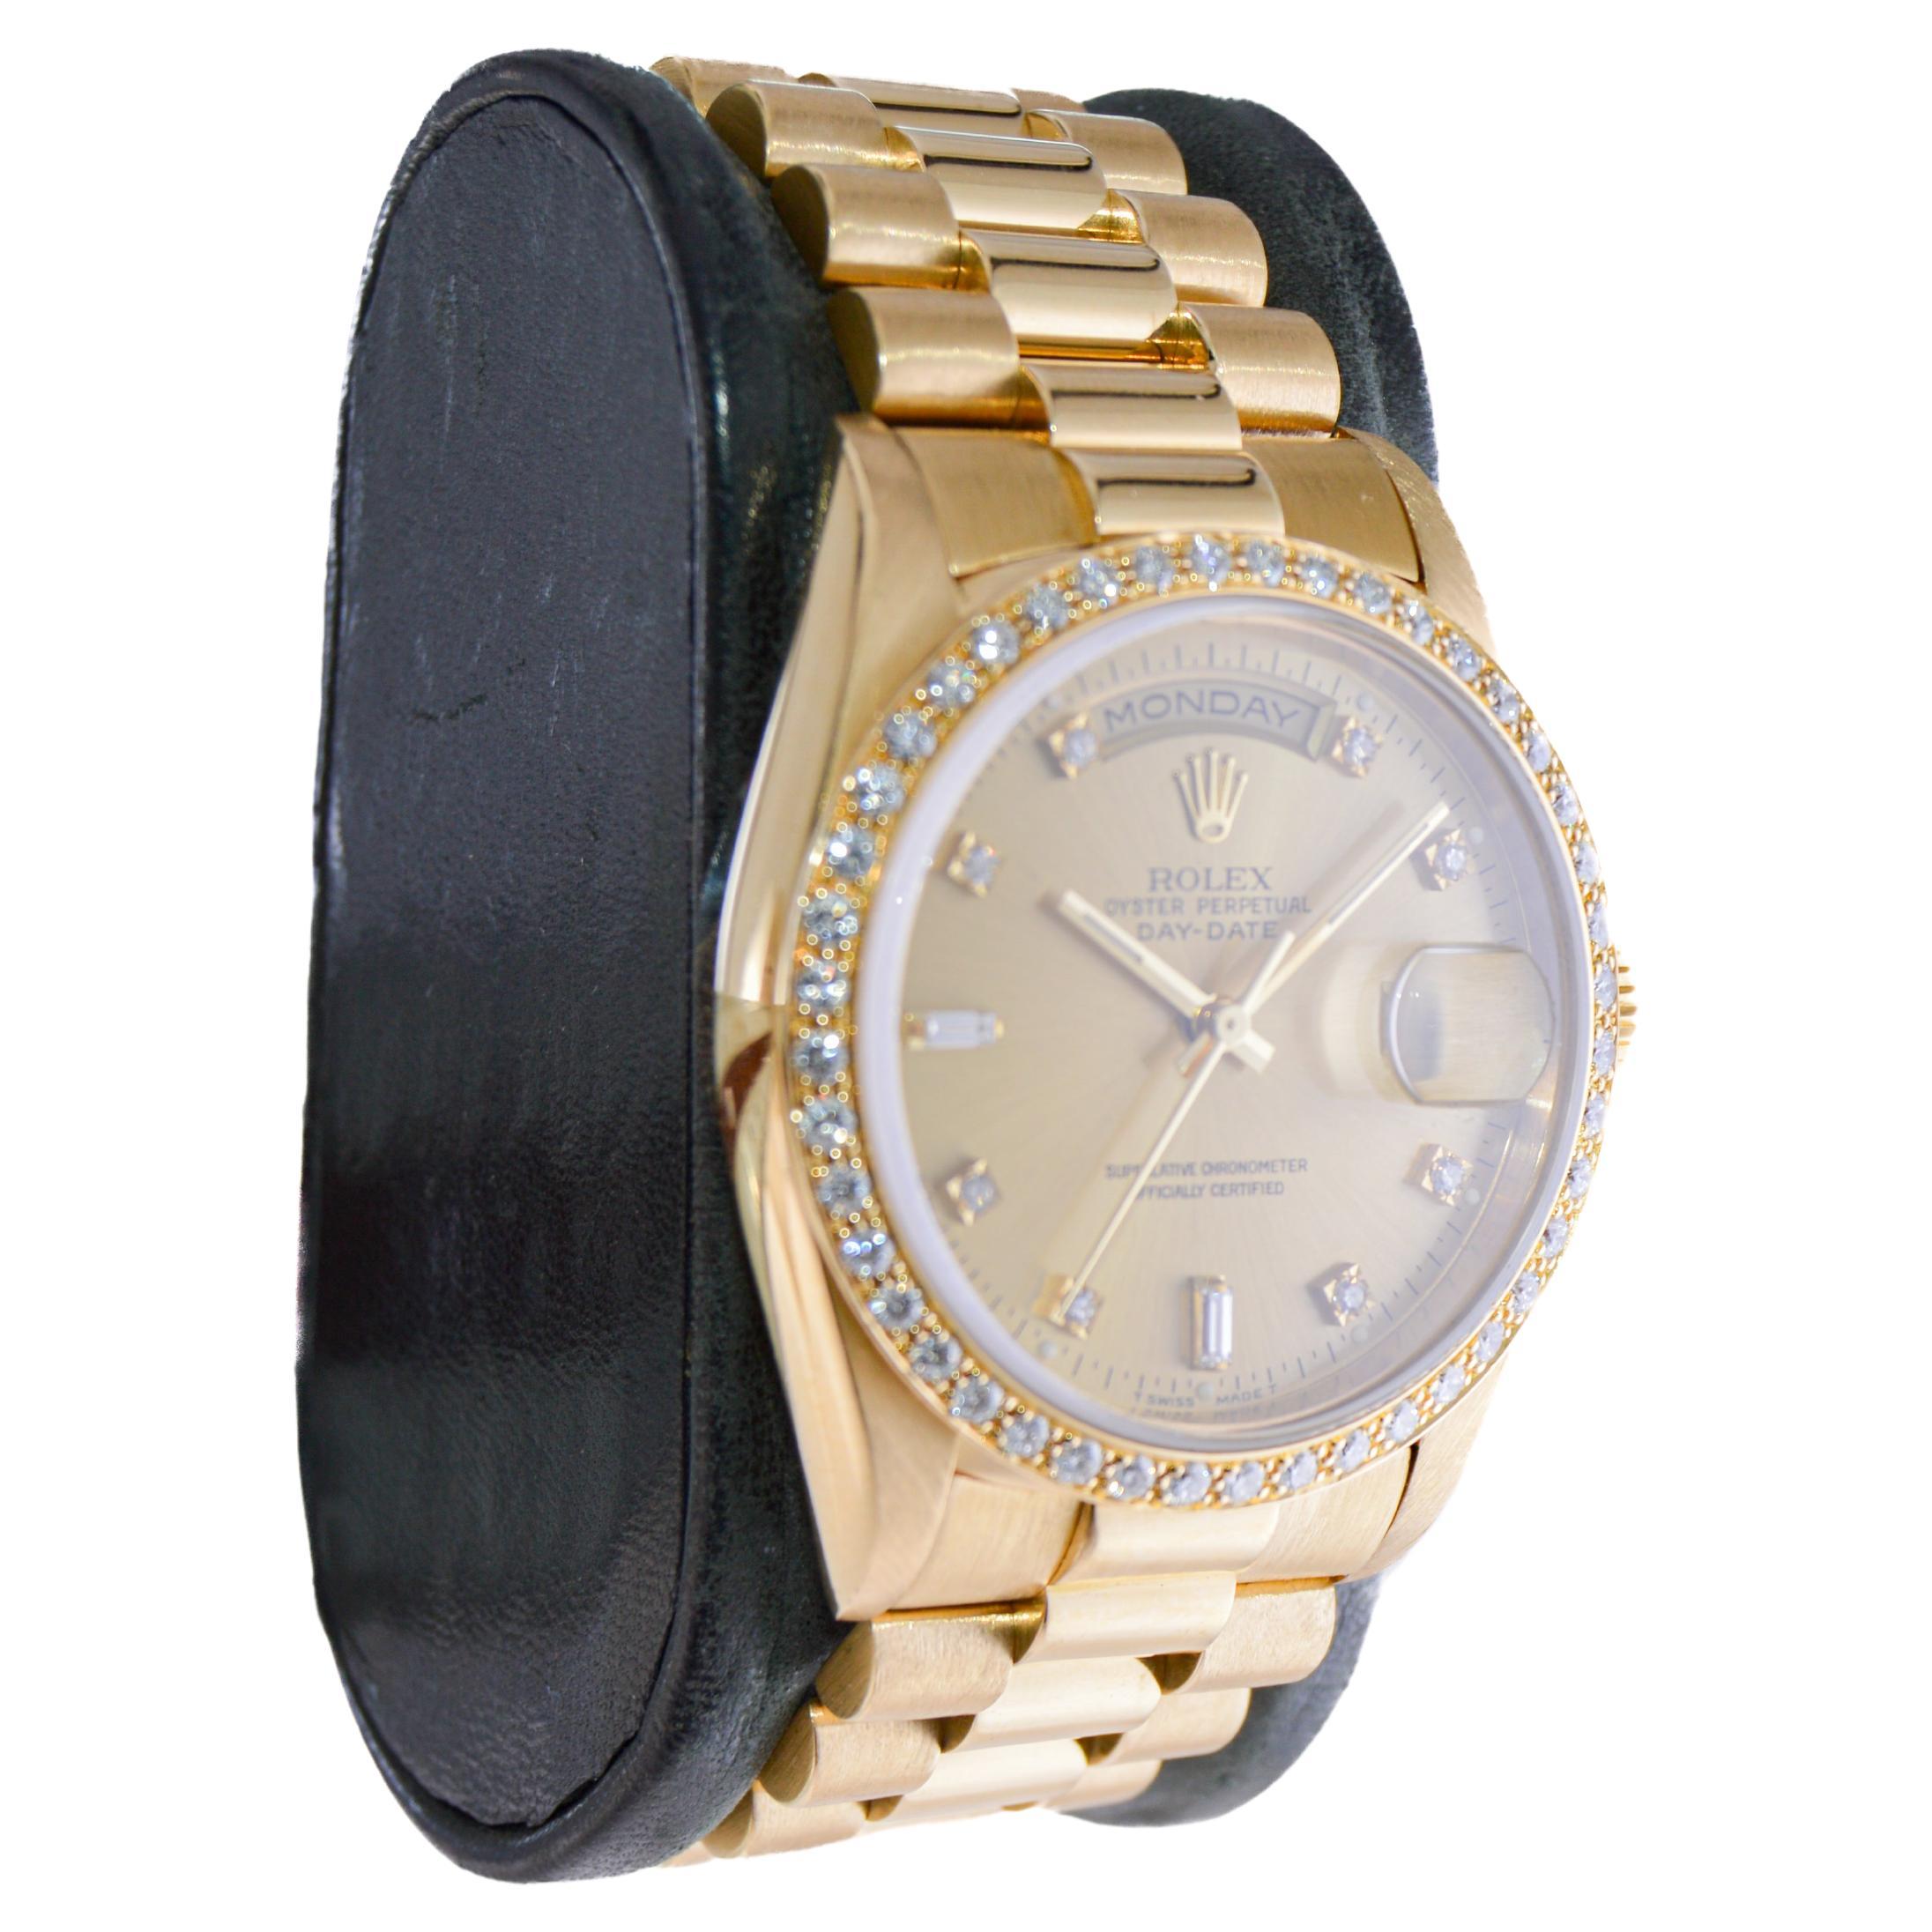 FACTORY / HOUSE: Rolex Watch Company
STYLE / REFERENCE: President / Reference 18000
METAL / MATERIAL: 18Kt. Solid Gold
CIRCA / YEAR: 1980's
DIMENSIONS / SIZE: 43mm Length X 36mm Diameter
MOVEMENT / CALIBER: Perpetual Winding / 31 Jewels / Caliber